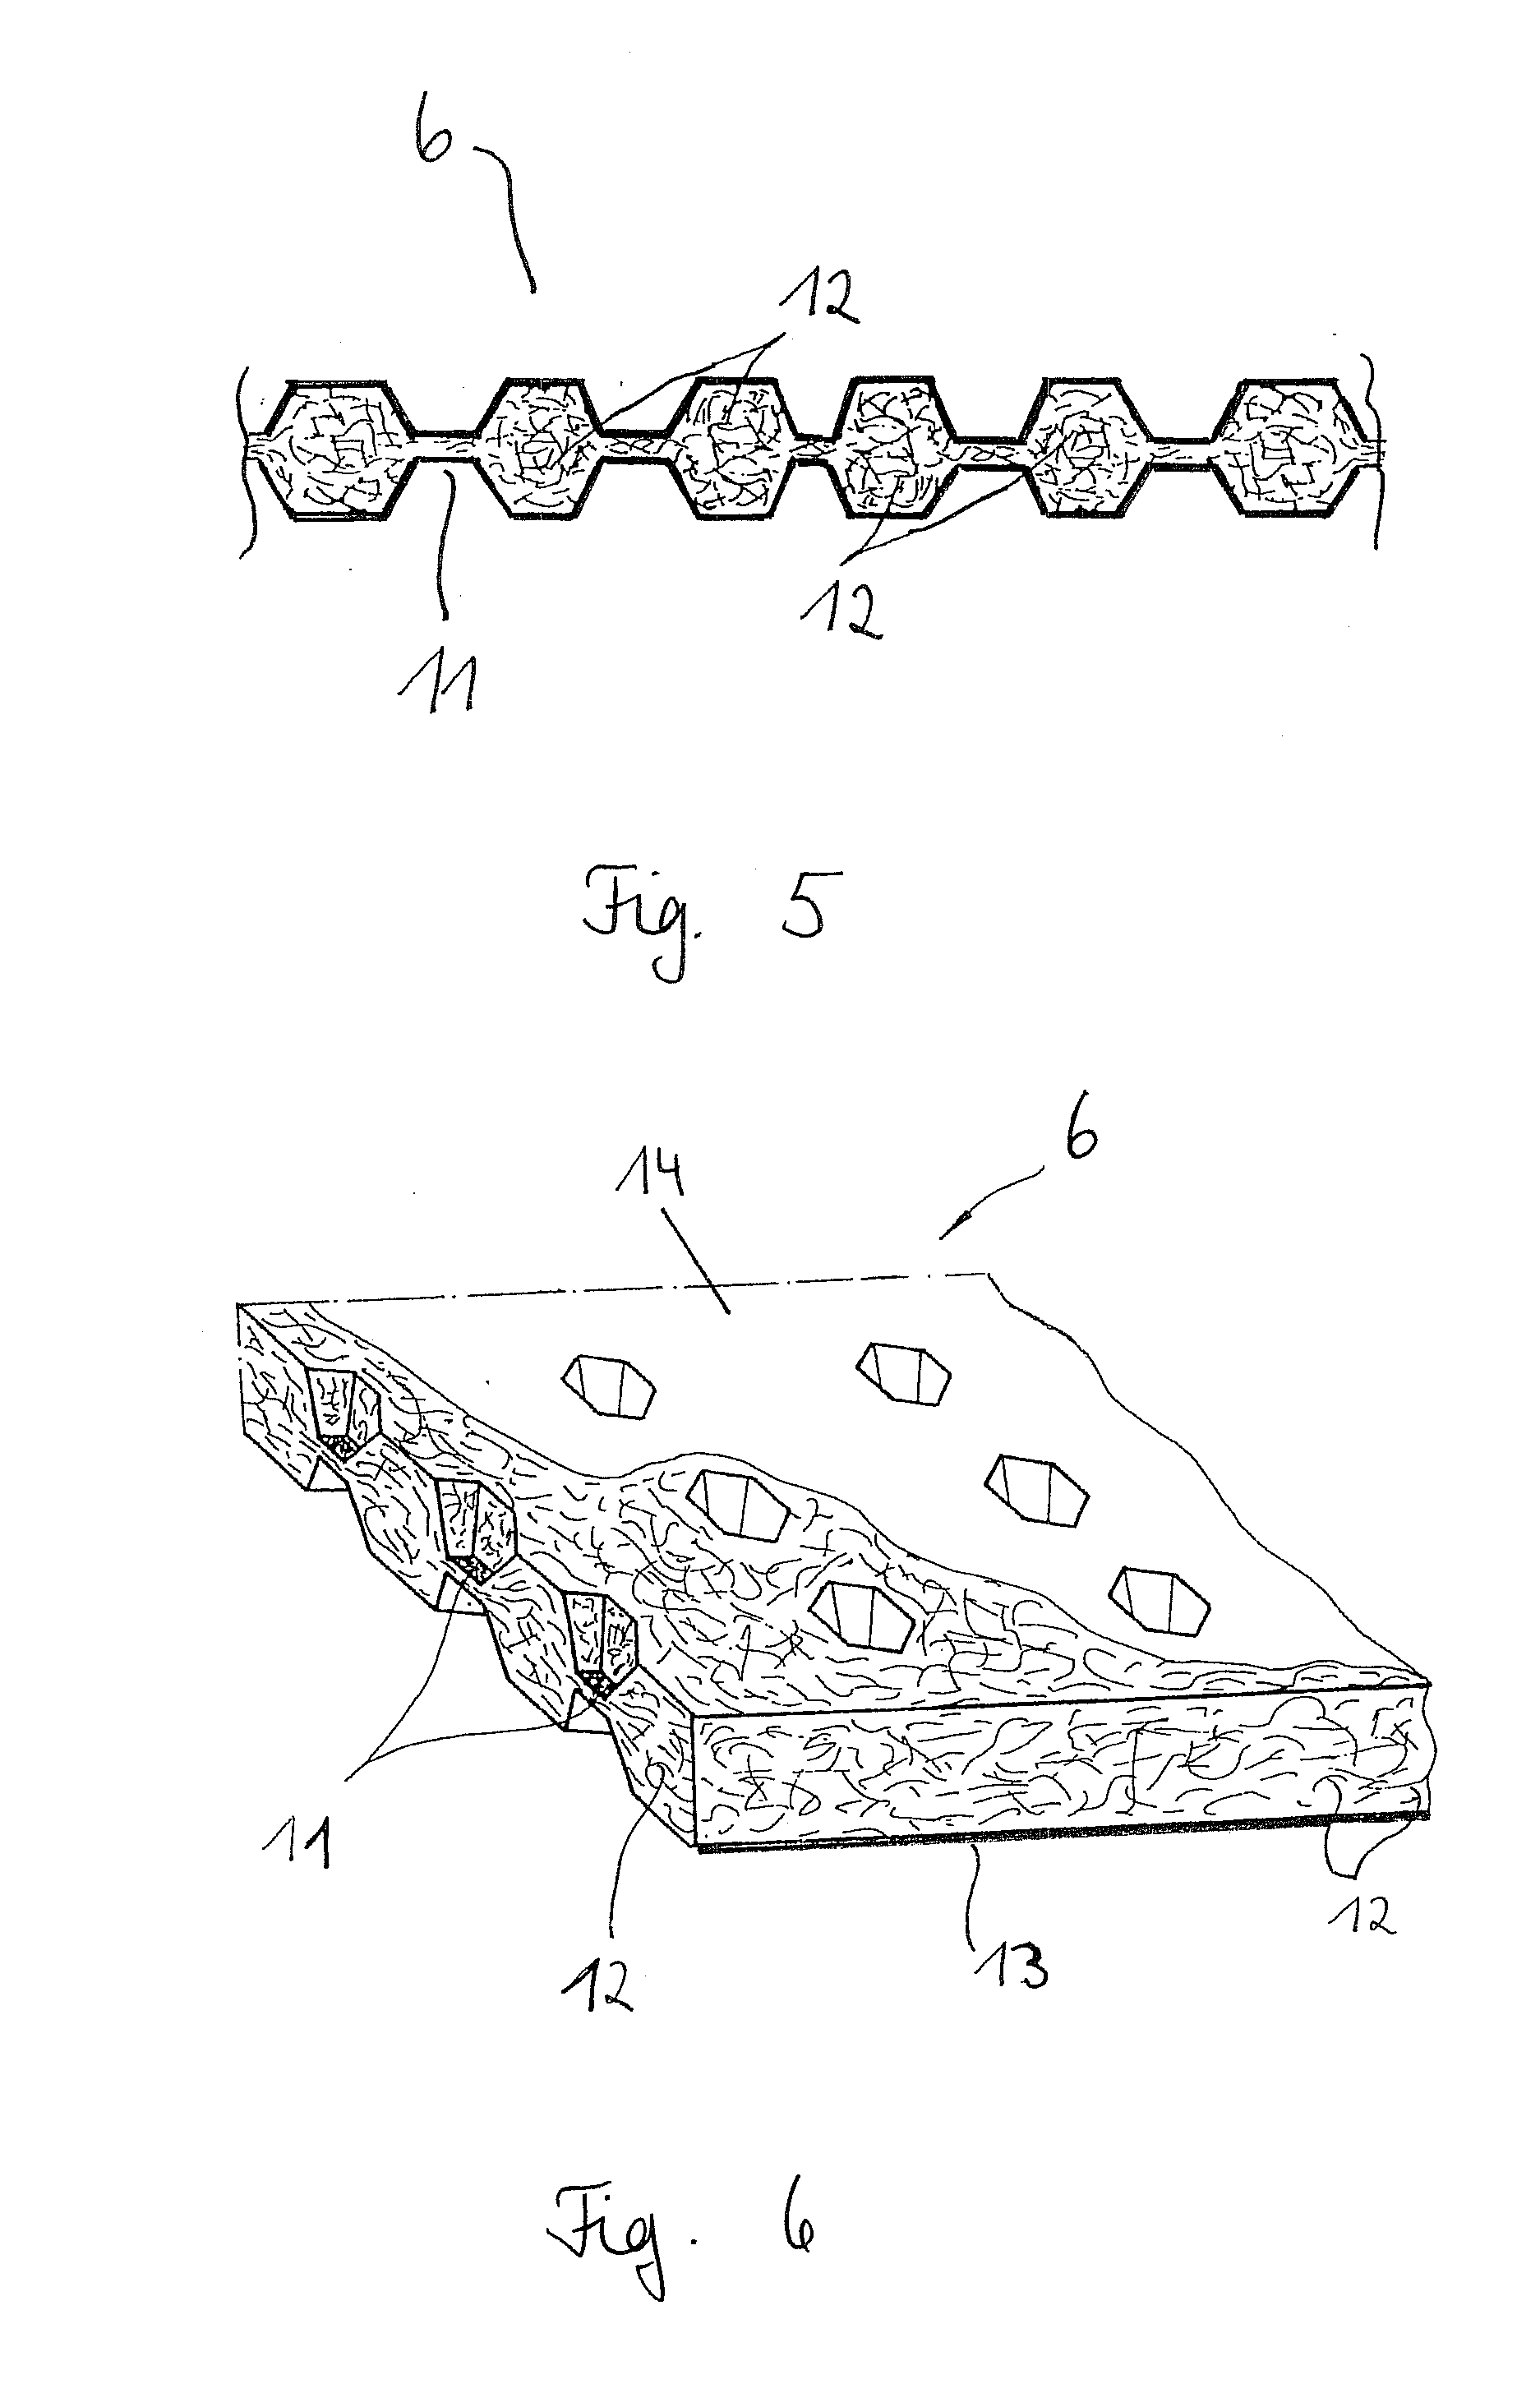 Absorption Body for Use on Wounds